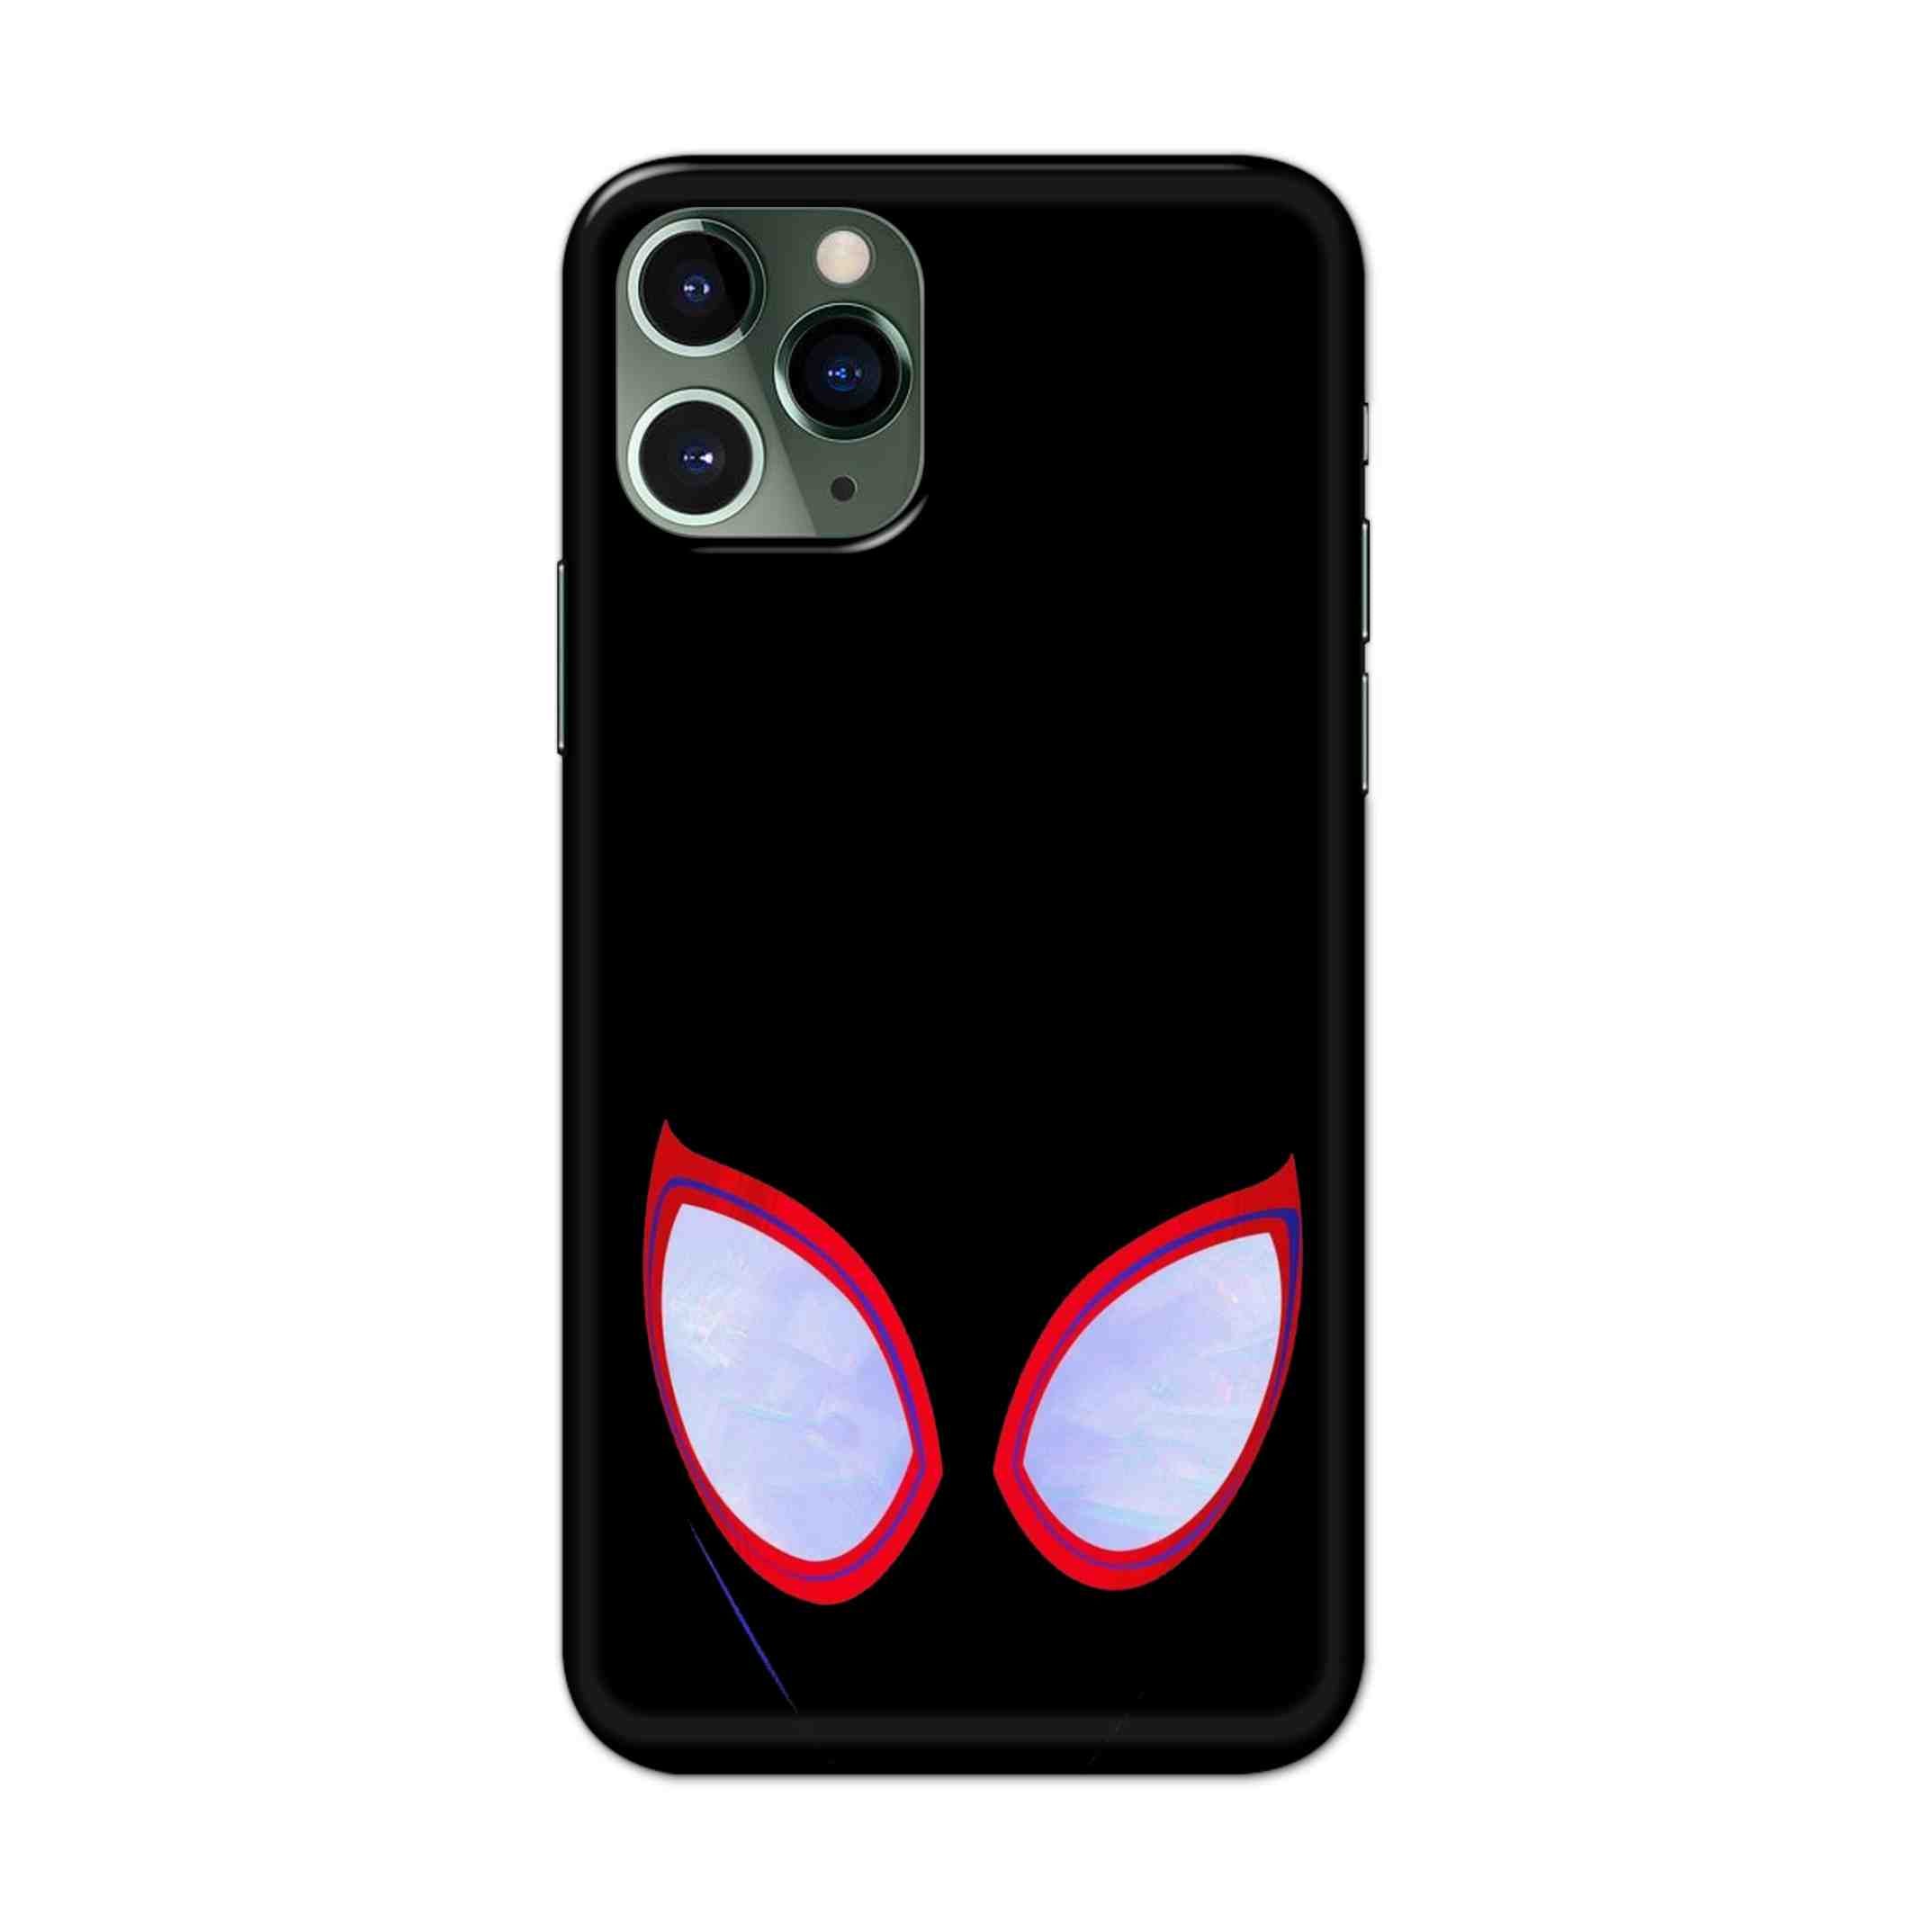 Buy Spiderman Eyes Hard Back Mobile Phone Case/Cover For iPhone 11 Pro Online